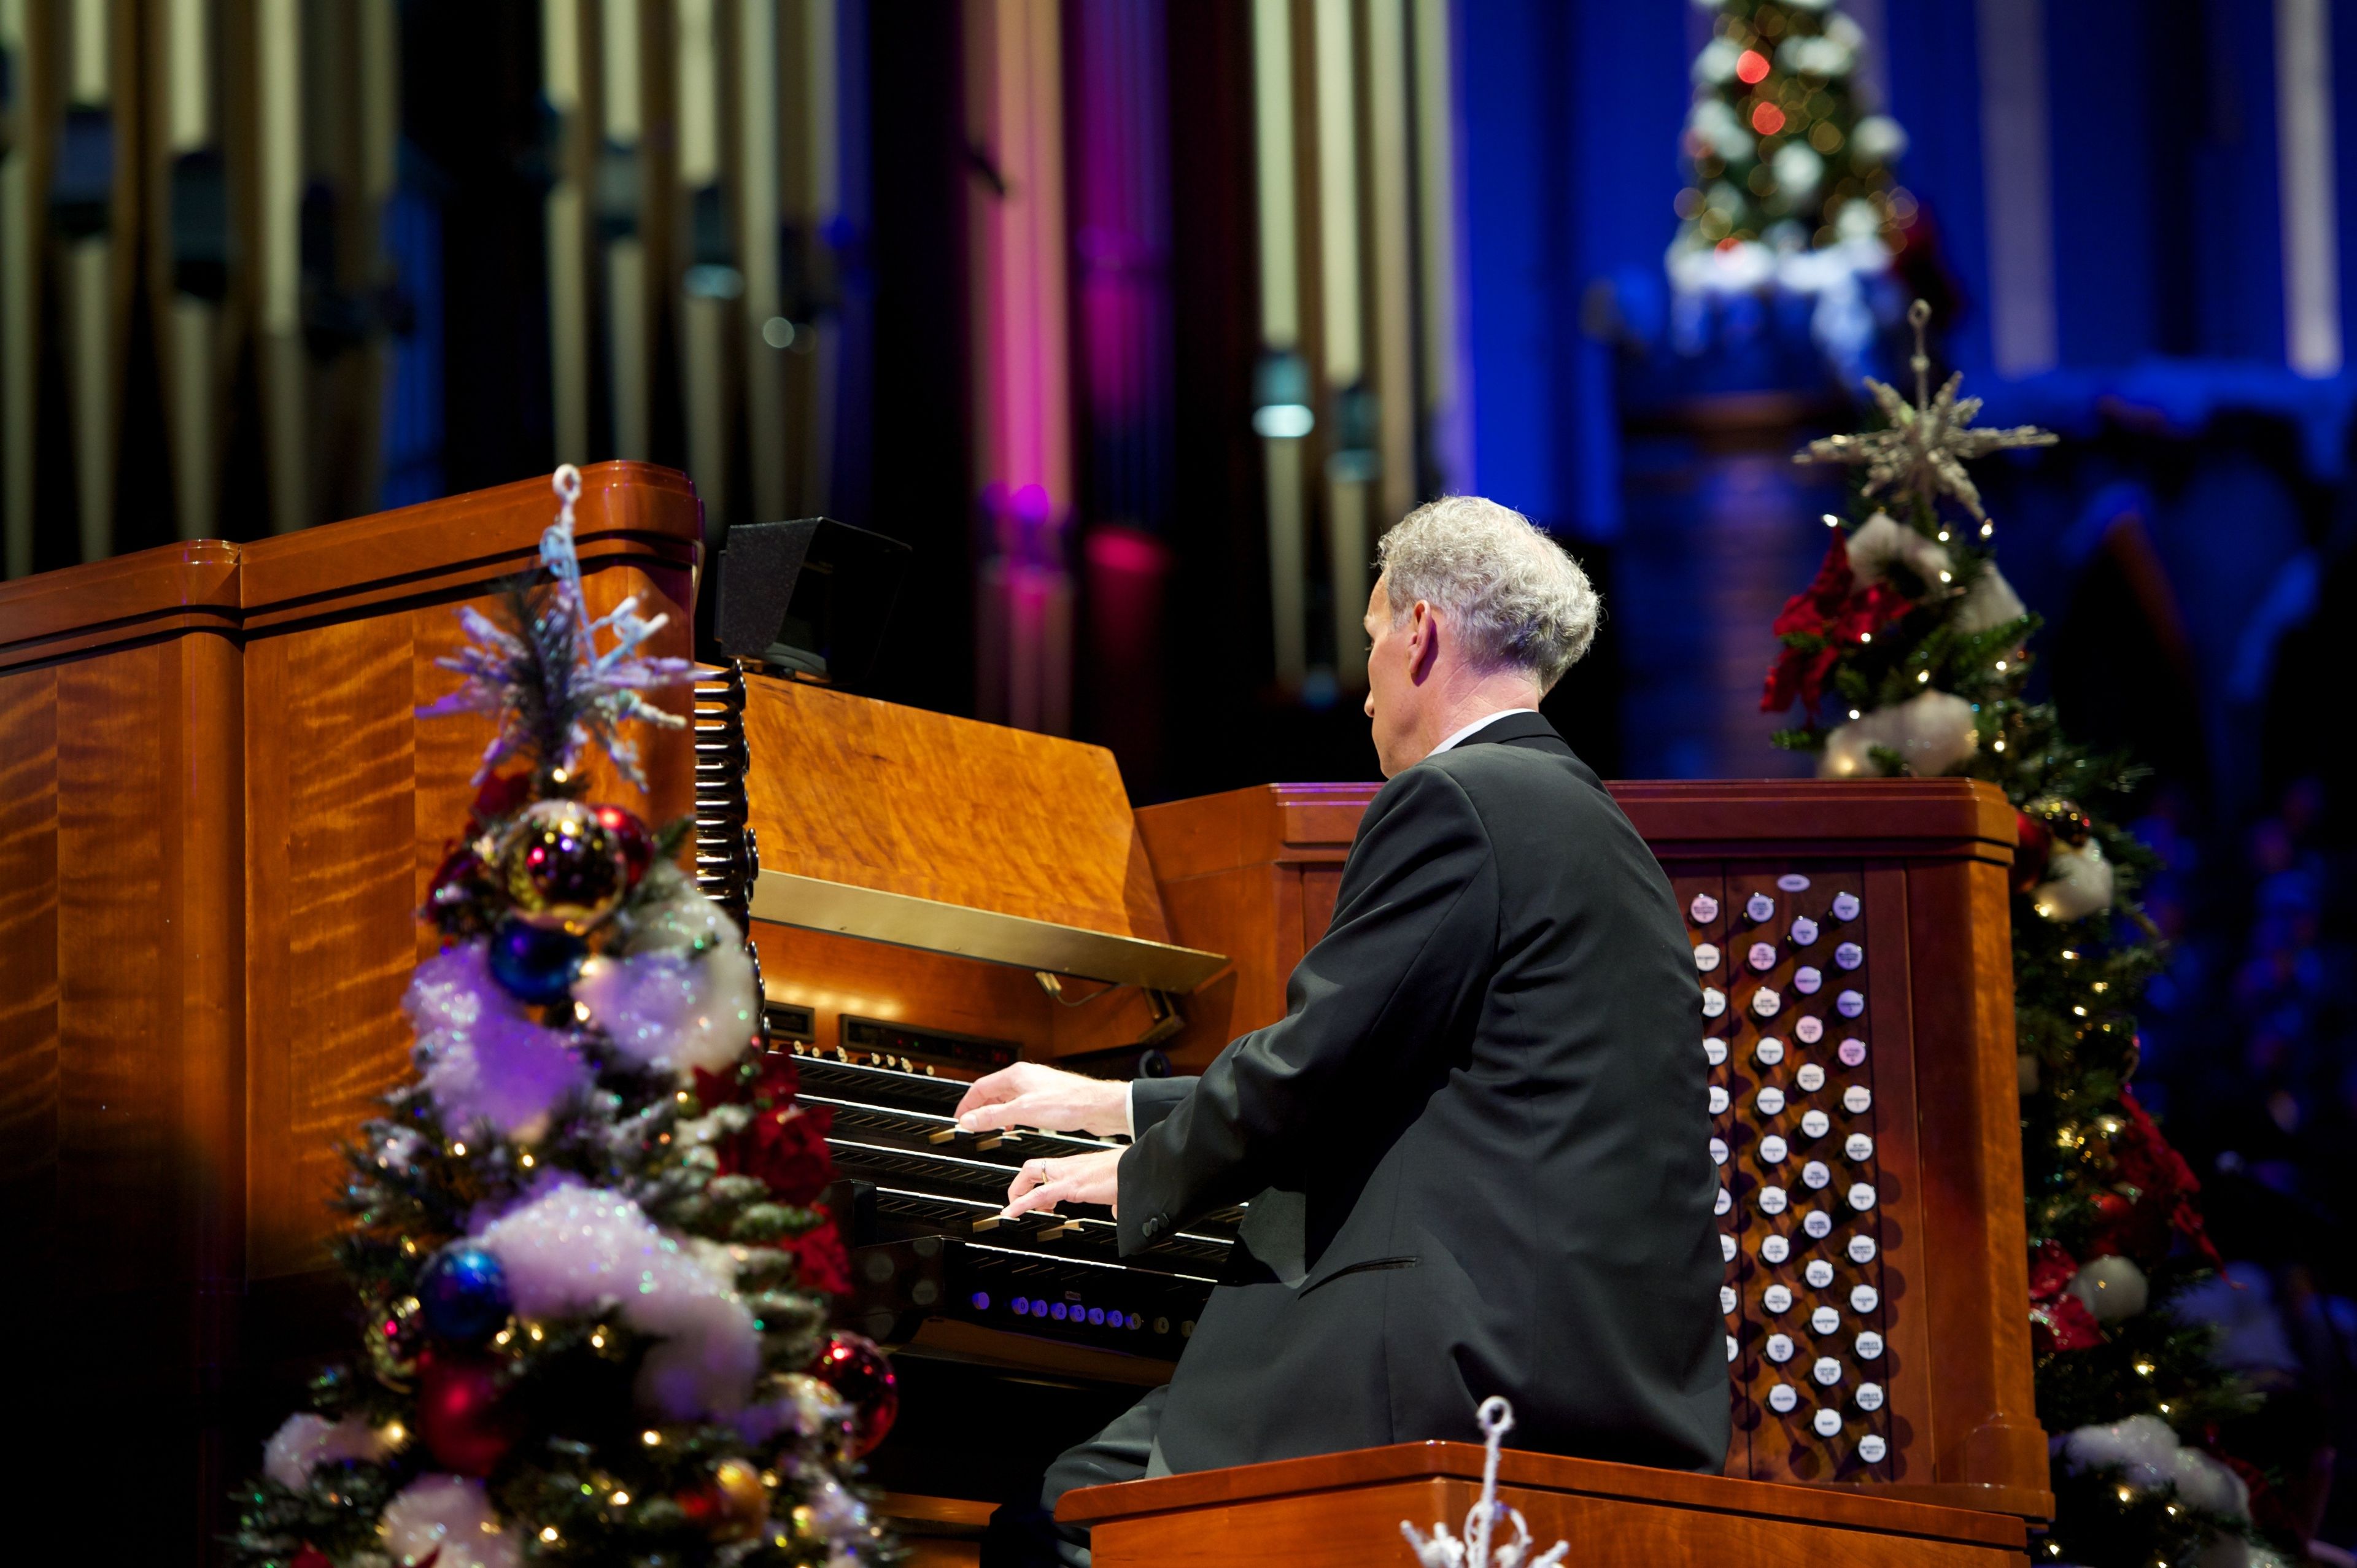 A man in a black suit playing the organ in the 2011 Christmas concert.